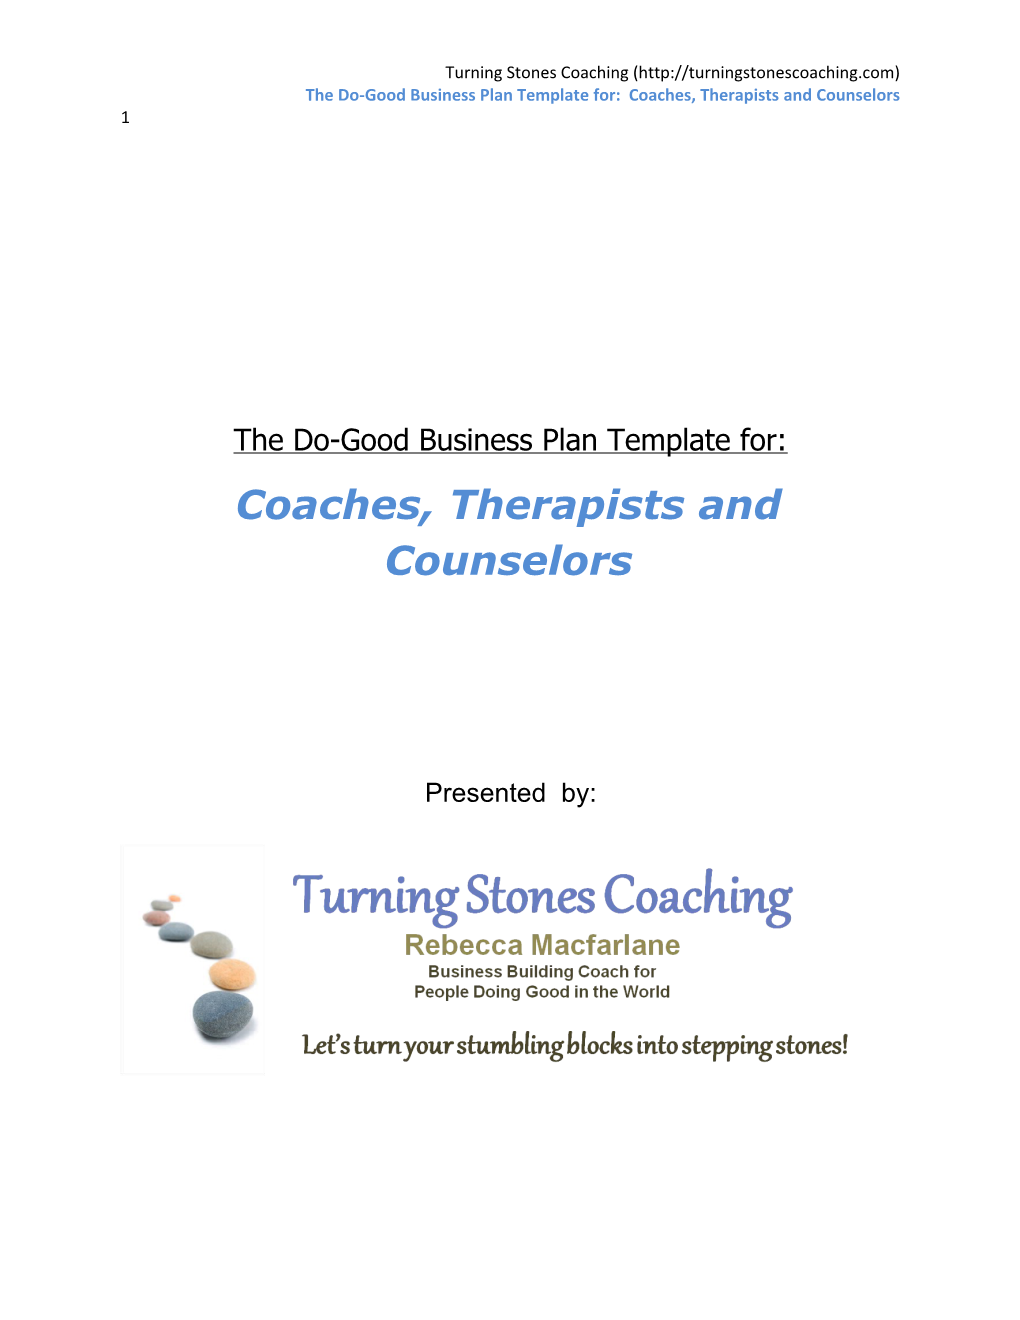 The Do-Good Business Plan Template For: Coaches, Therapists and Counselors